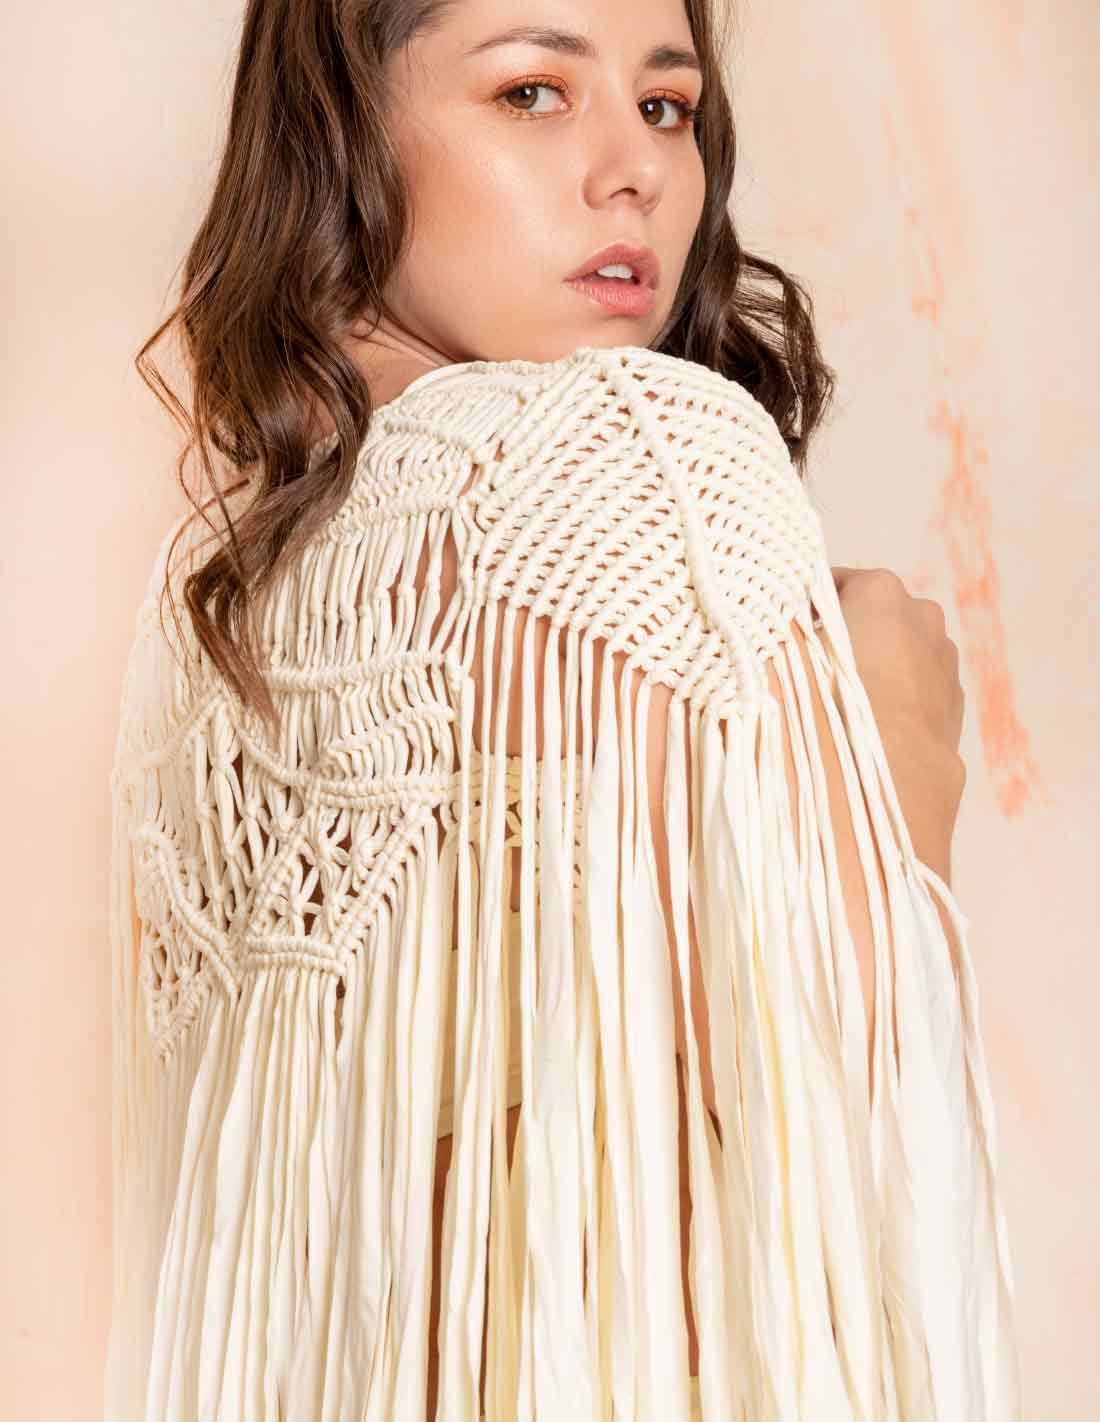 Stem Cardigan Ivory. Cardigan With Hand Woven Macramé In Ivory. Entreaguas